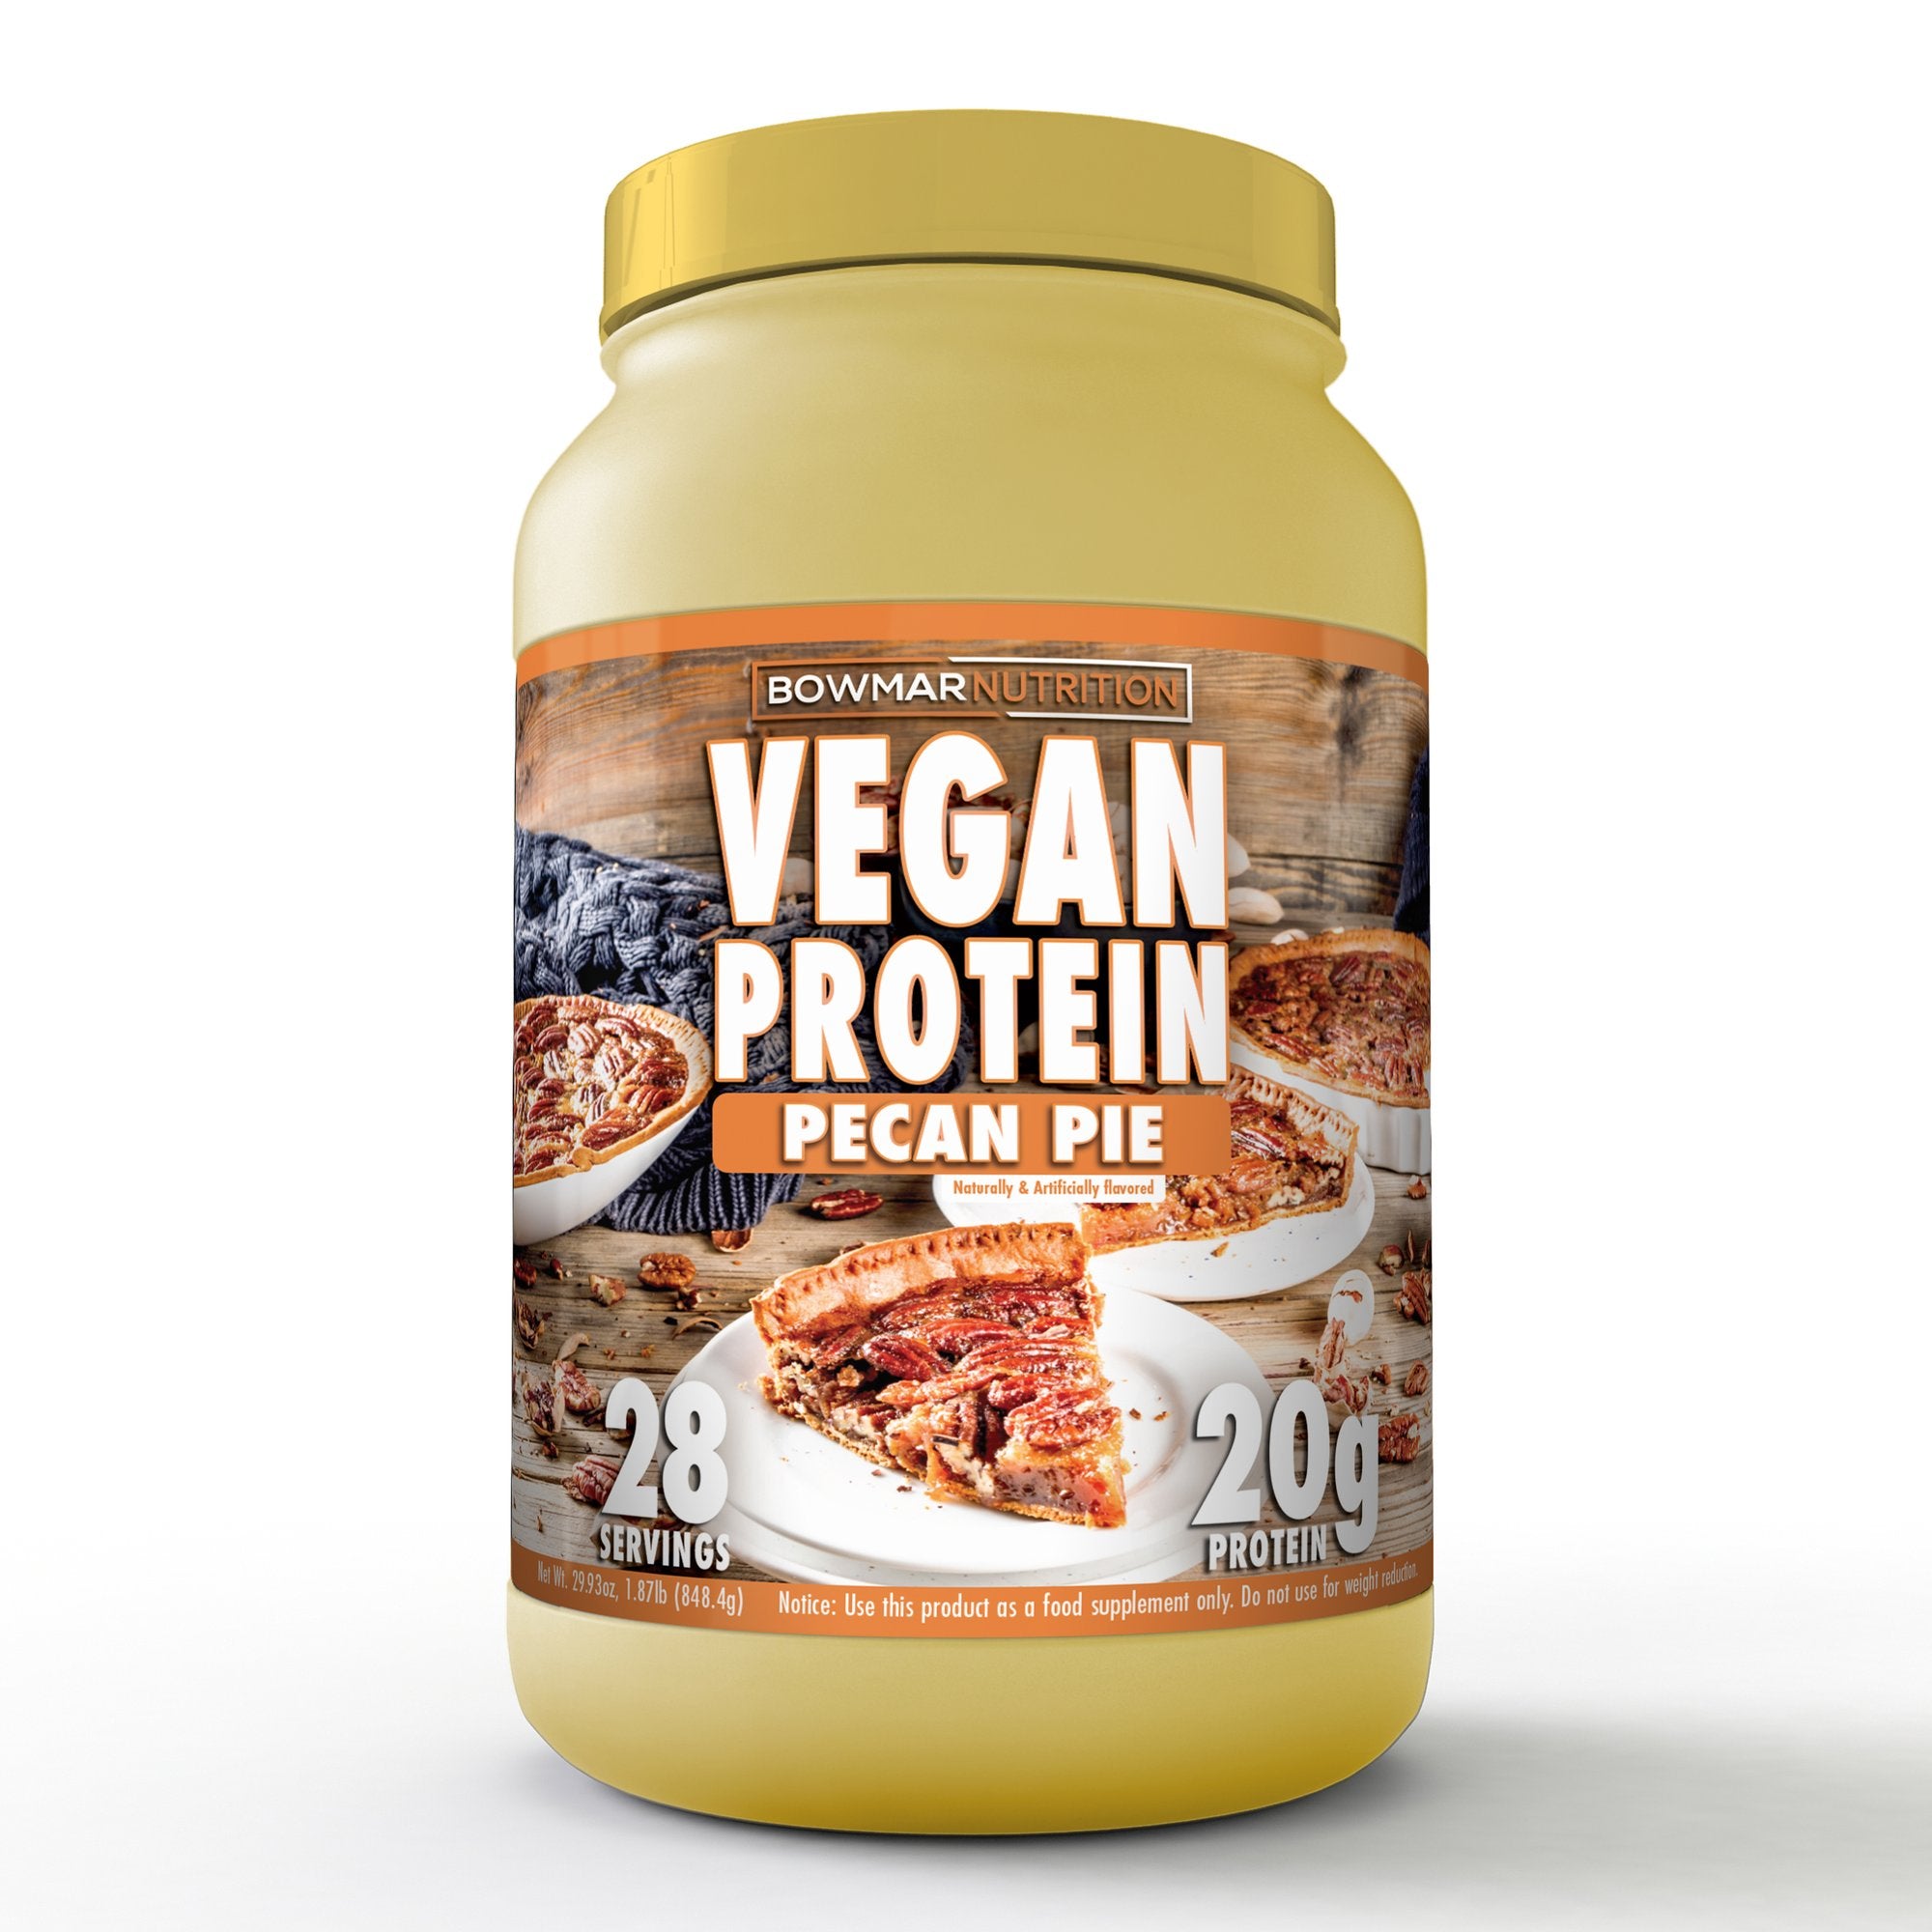 Bowmar Nutrition Vegan Protein (2lb) bowmar-nutrition-vegan-protein-2lb Vegan Protein Blueberry Donut,Banana Nut Bread,Peanut Butter Cookie,Chocolate Almond Coconut,Cinnamon Cereal,Cookies And Cream bowmar